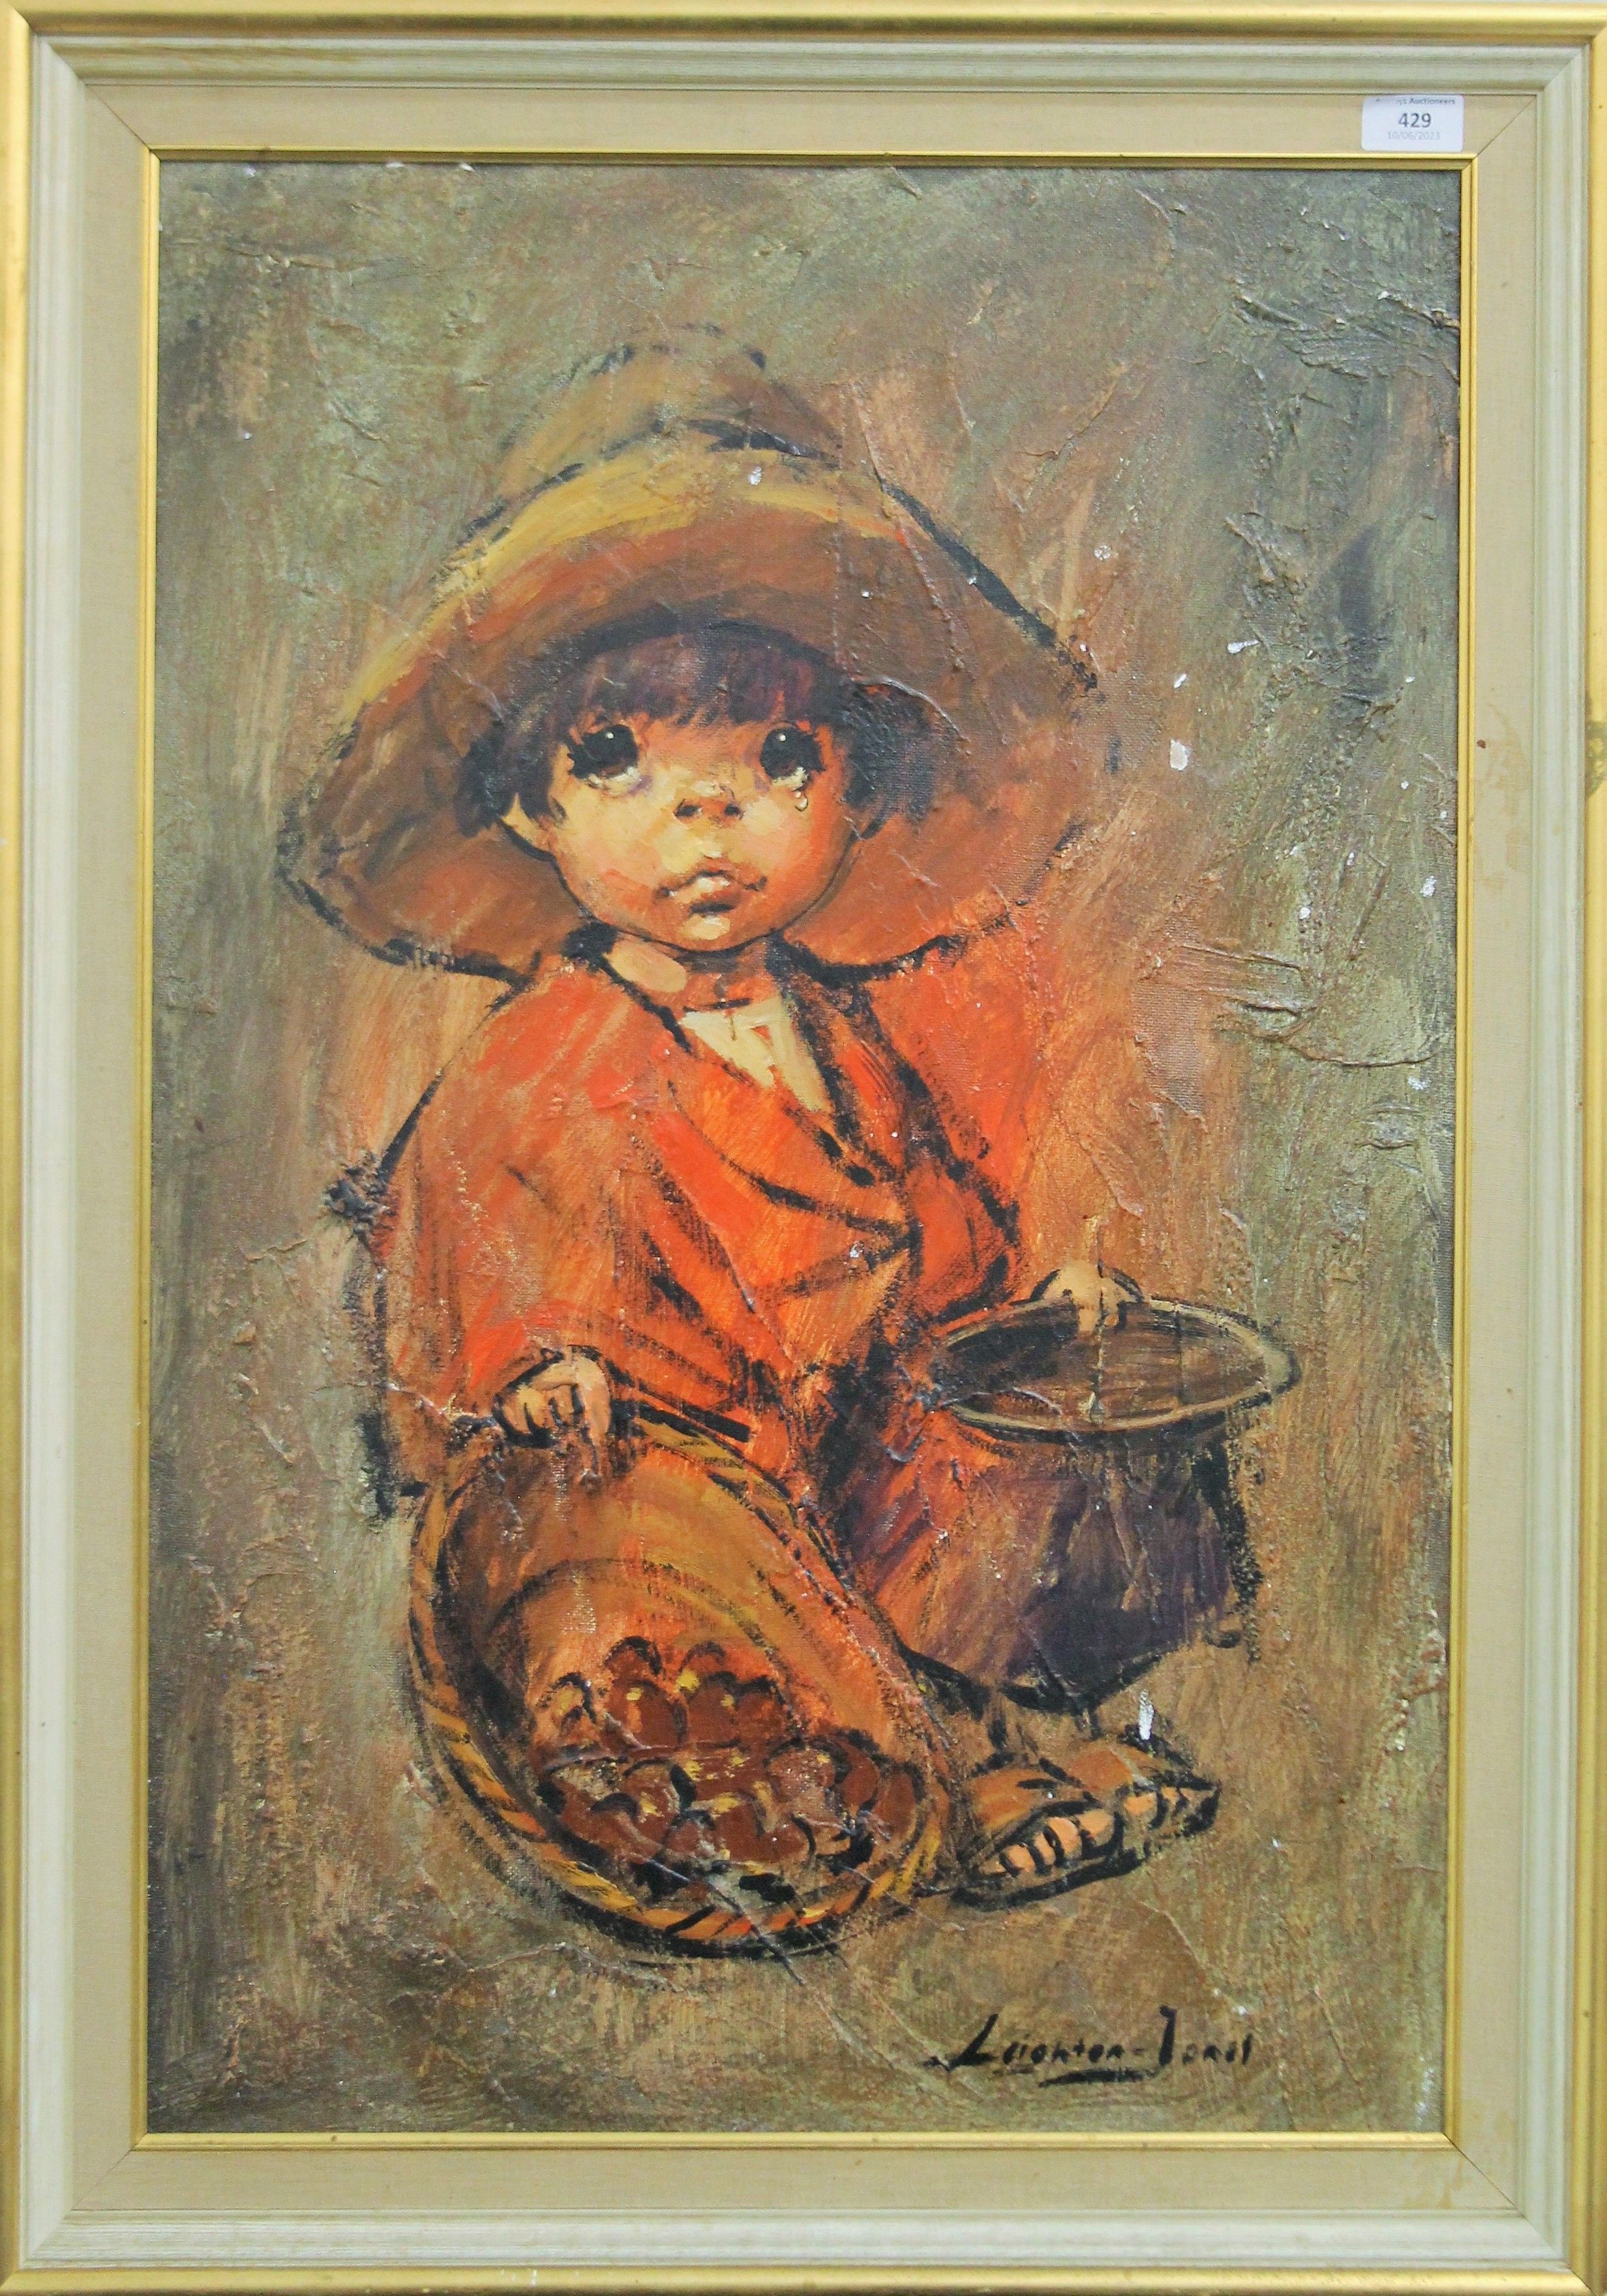 LEIGHTON JONES, A Young Boy, oil on board, framed. 49.5 x 75 cm. - Image 2 of 3